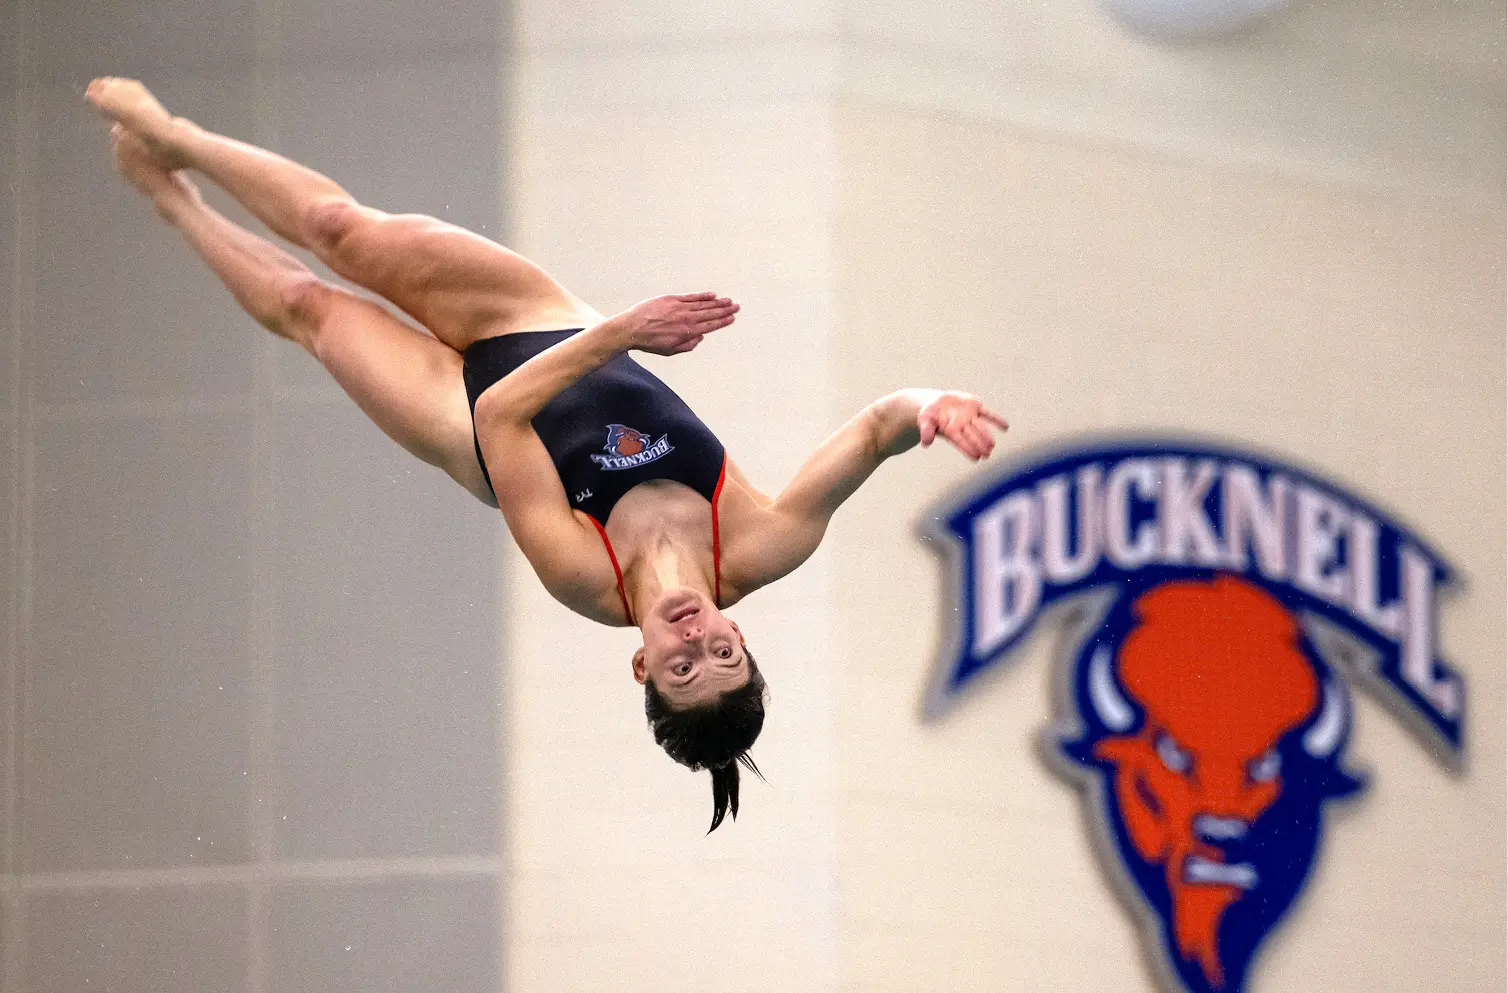 Meghan Catherwood using gymnastics practices as she dives into a pool